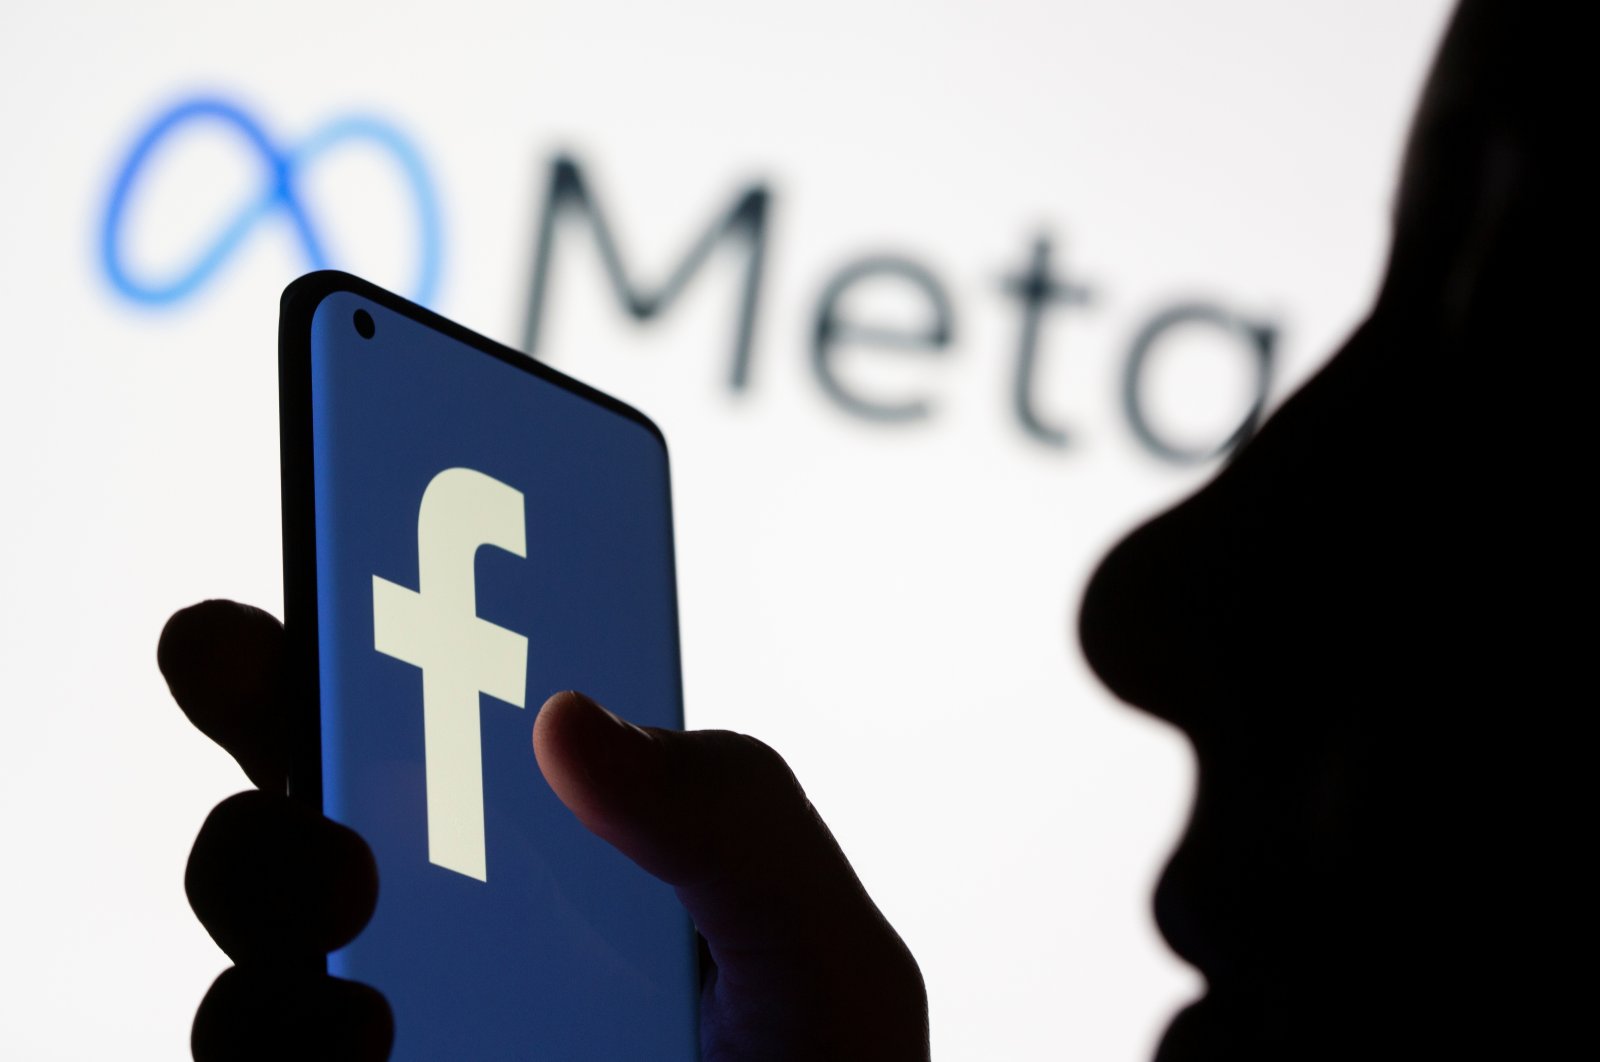 Woman holds smartphone with Facebook logo in front of Facebook's new rebrand logo Meta in this illustration picture taken Oct. 28, 2021. (REUTERS)